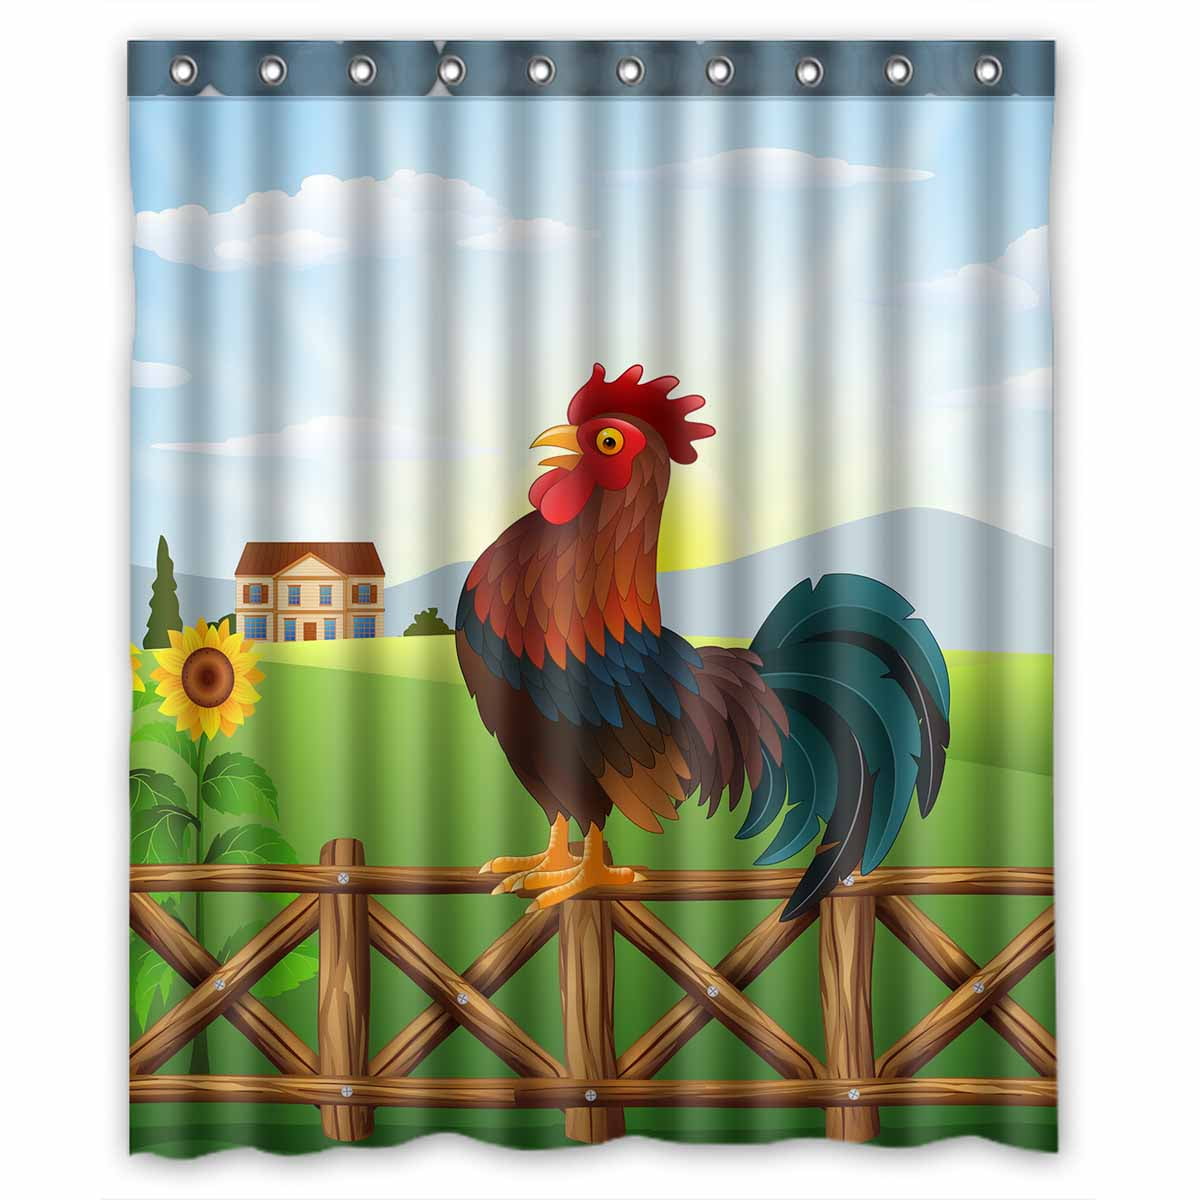 Cartoon Rooster Farm Morning Polyester Fabric Shower Curtain Bath Accessory Sets 